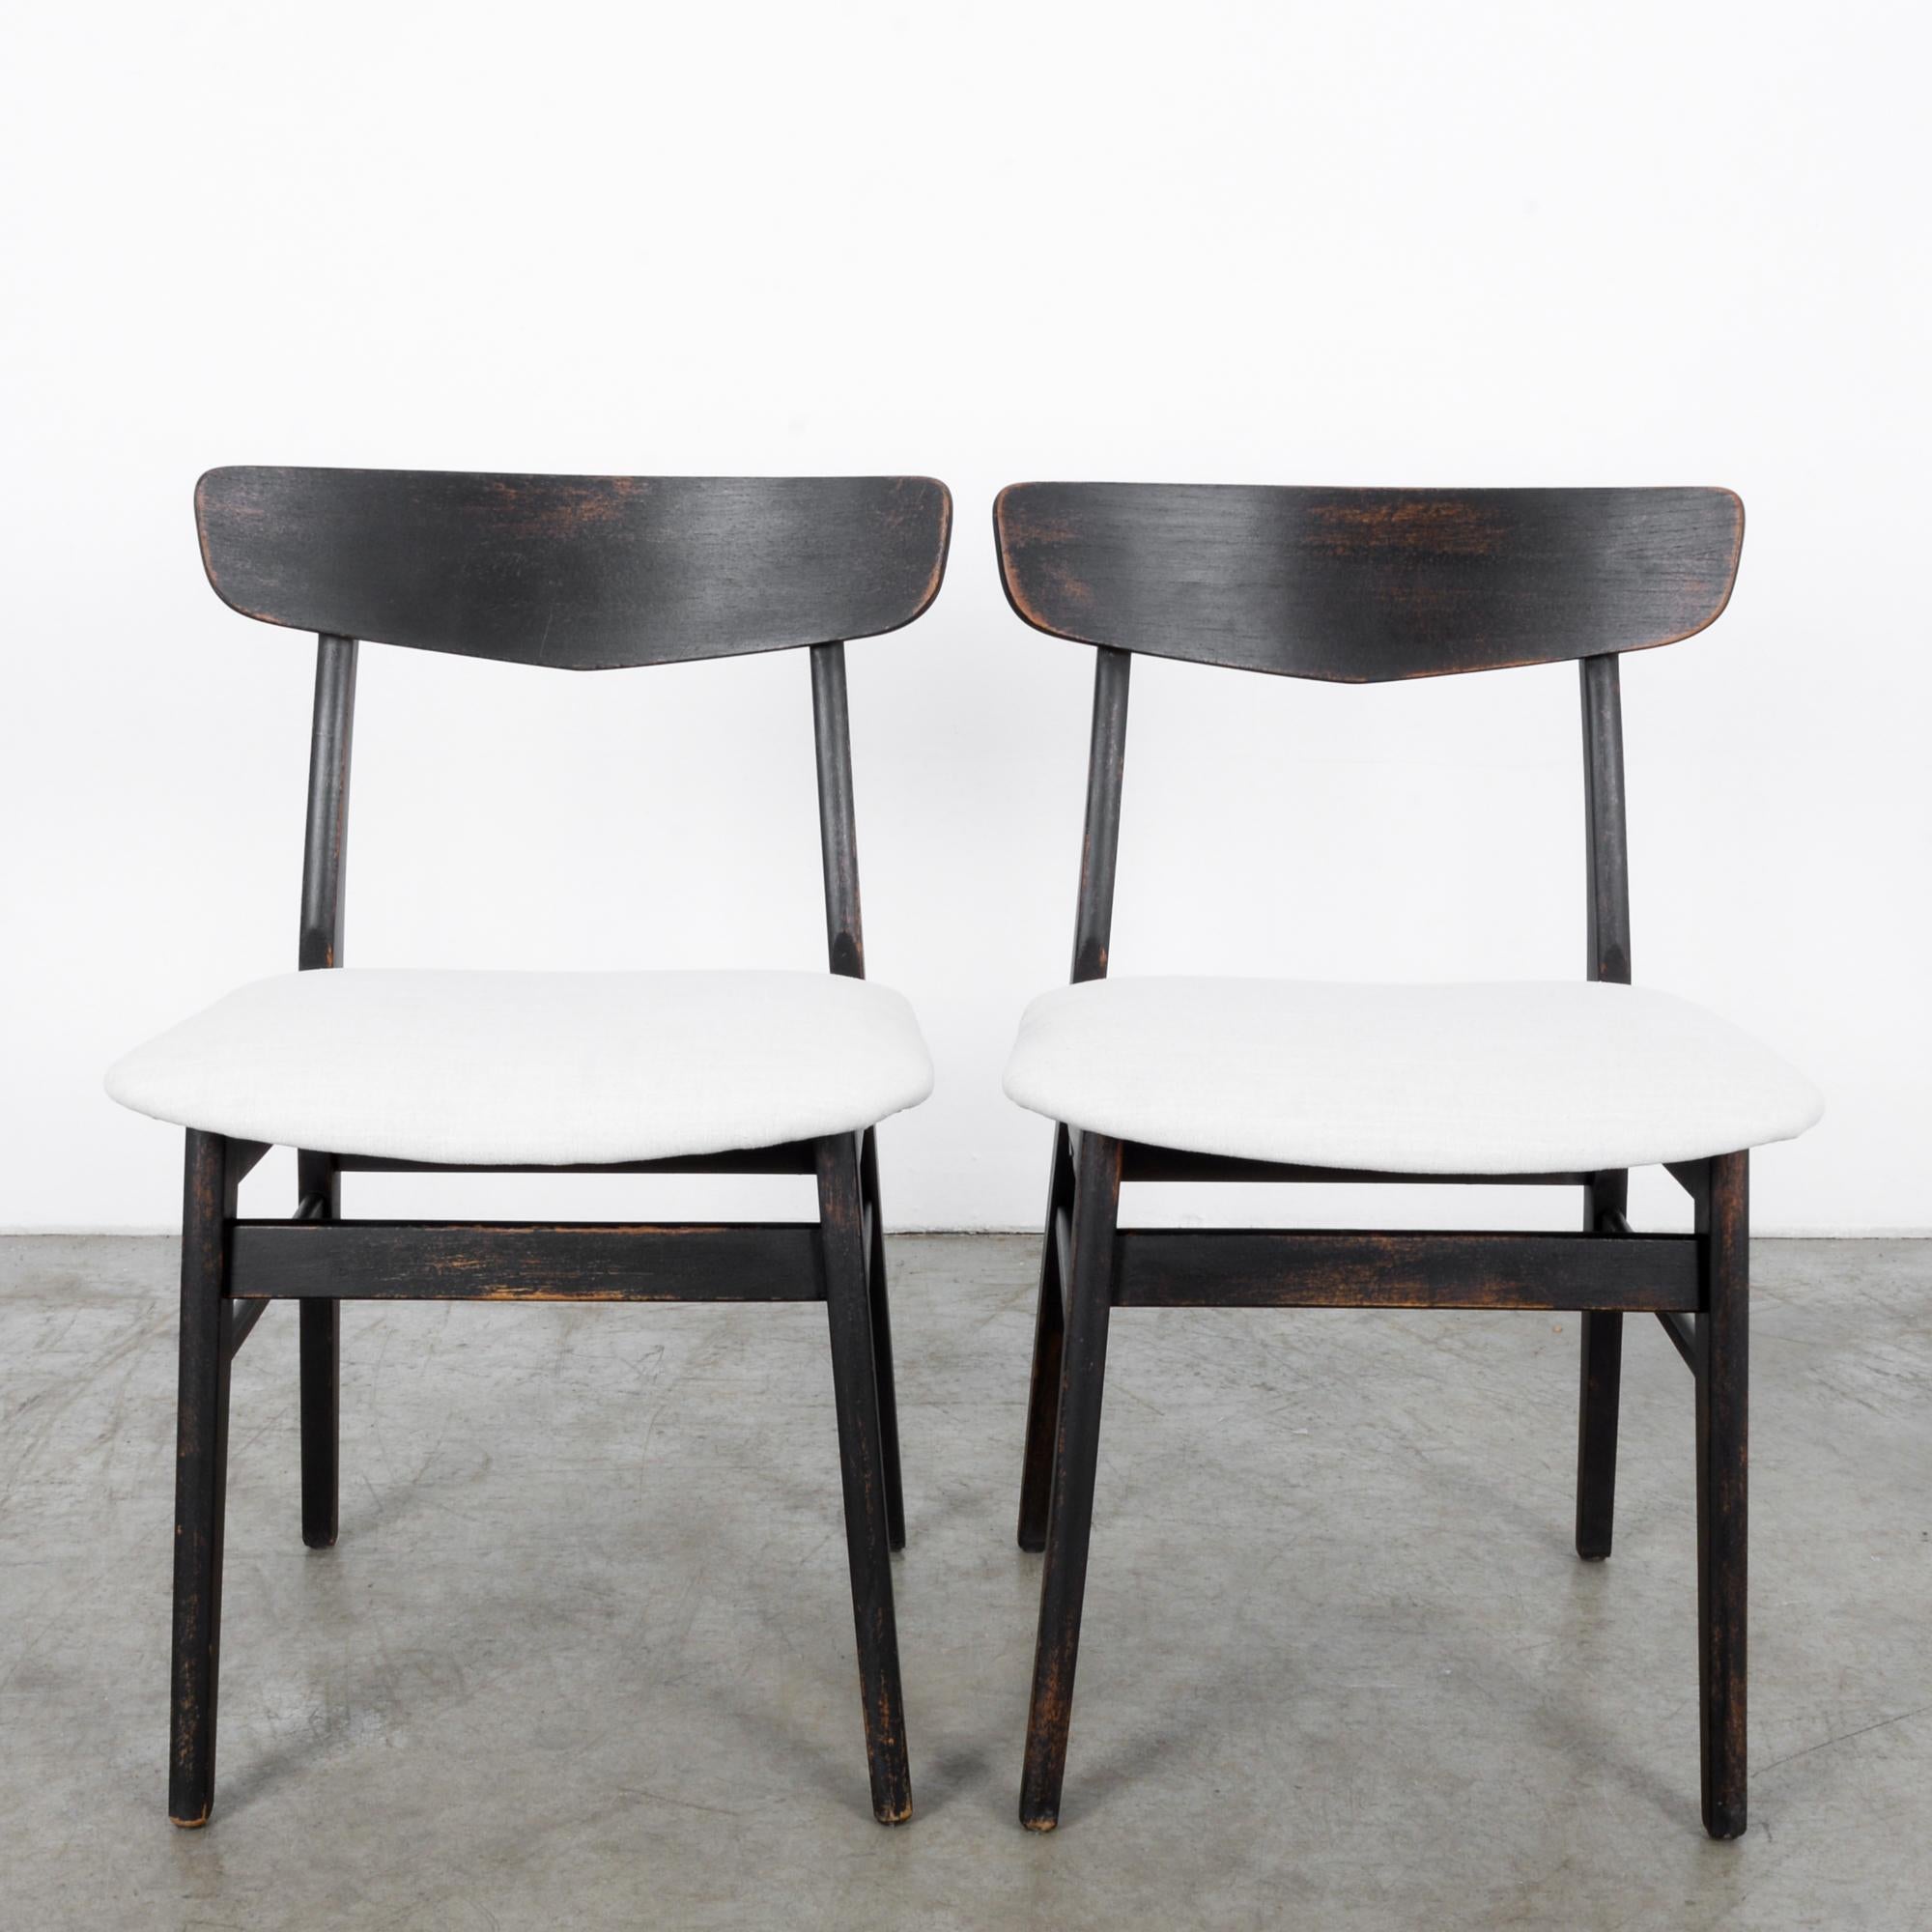 1960s Danish Upholstered Black Chairs, a Pair 1